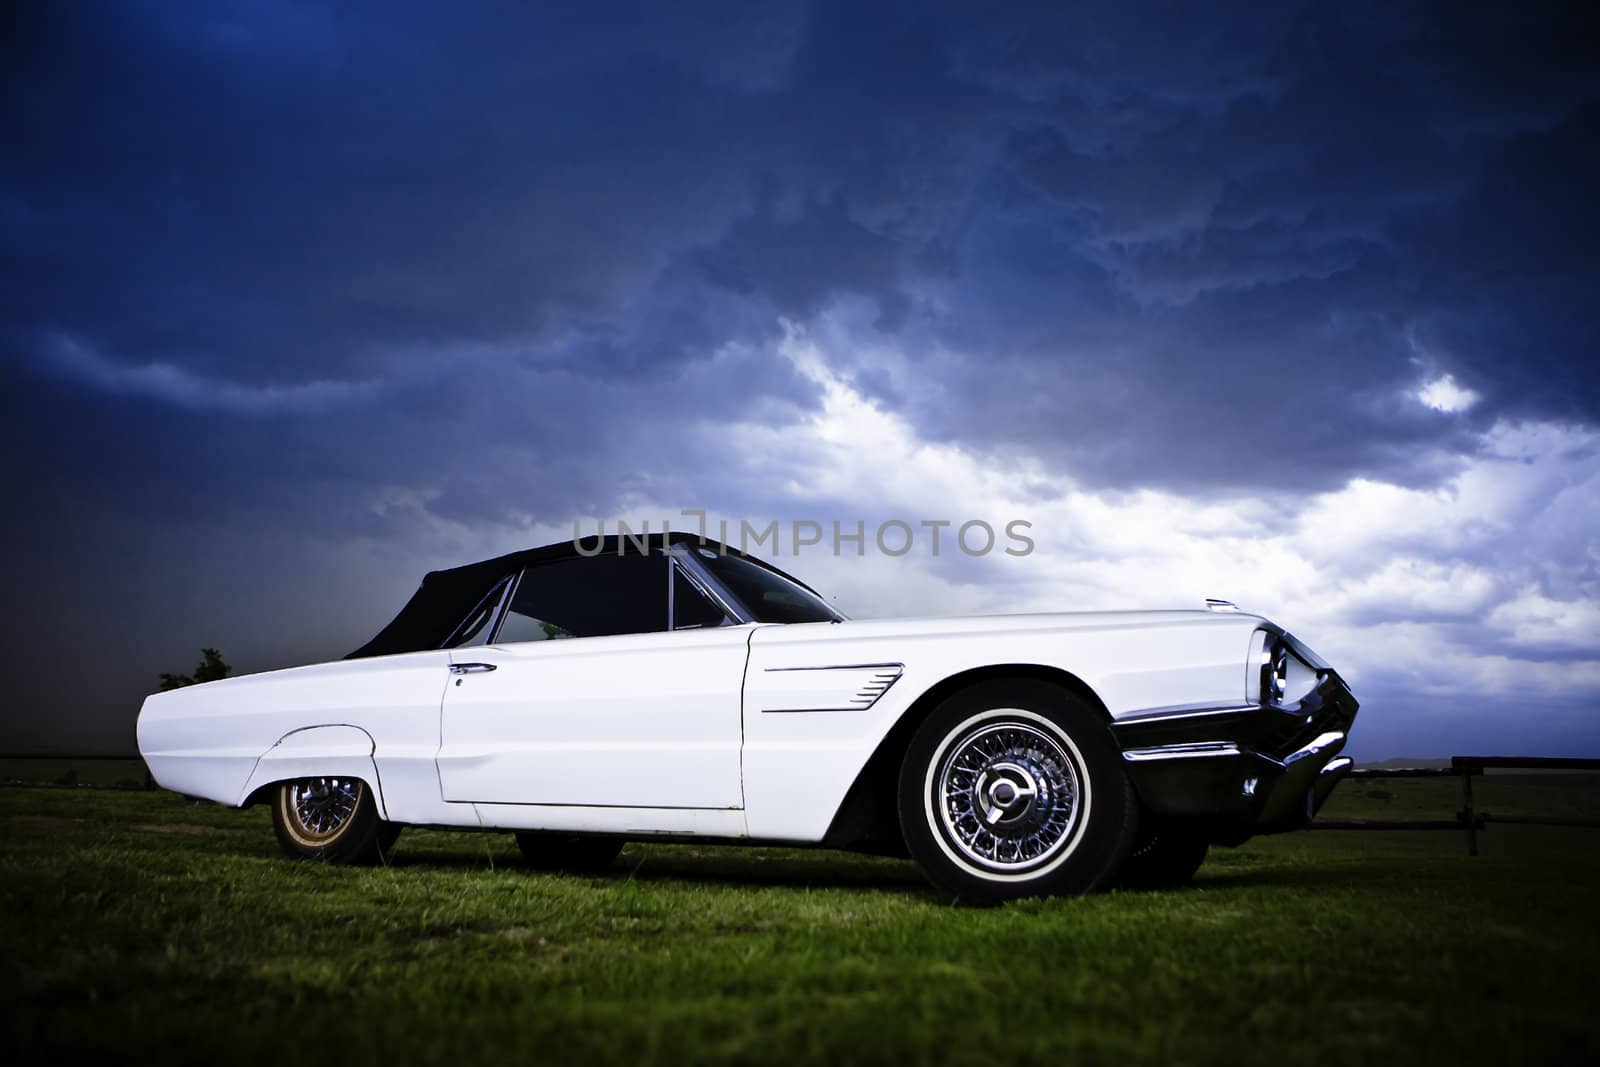 an old vintage convertible car on a green lawn against a dramatic cloudy sky